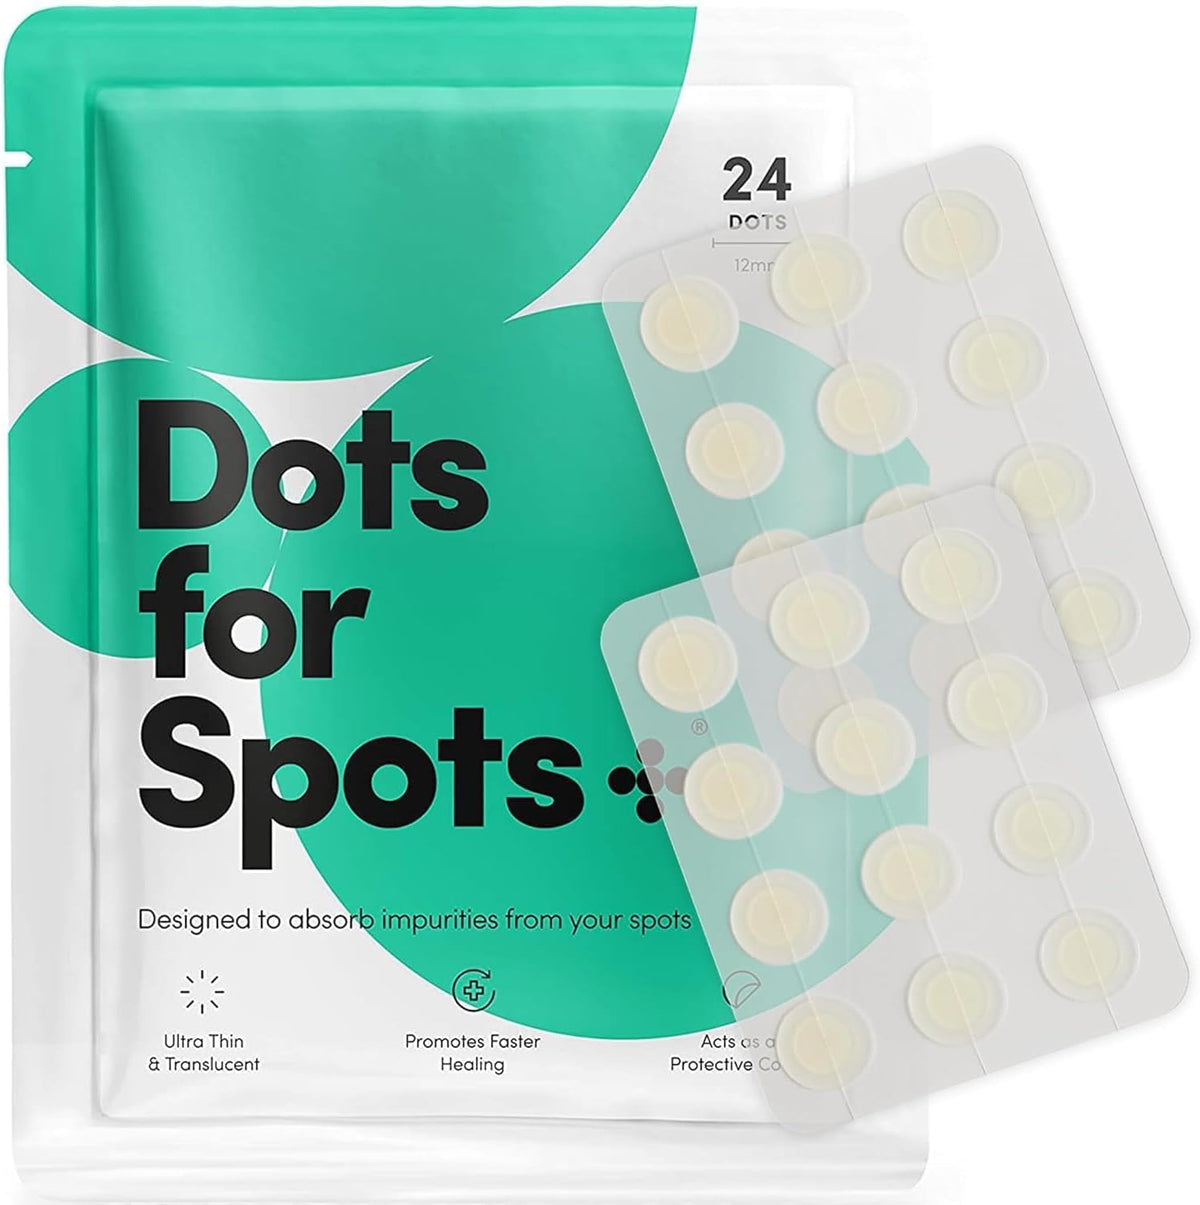 Dots for Spots Acne Patches - Pack of 24 Translucent Hydrocolloid Pimple Patch for Face and Body - Fast-Acting, Vegan & Cruelty Free Skin Care